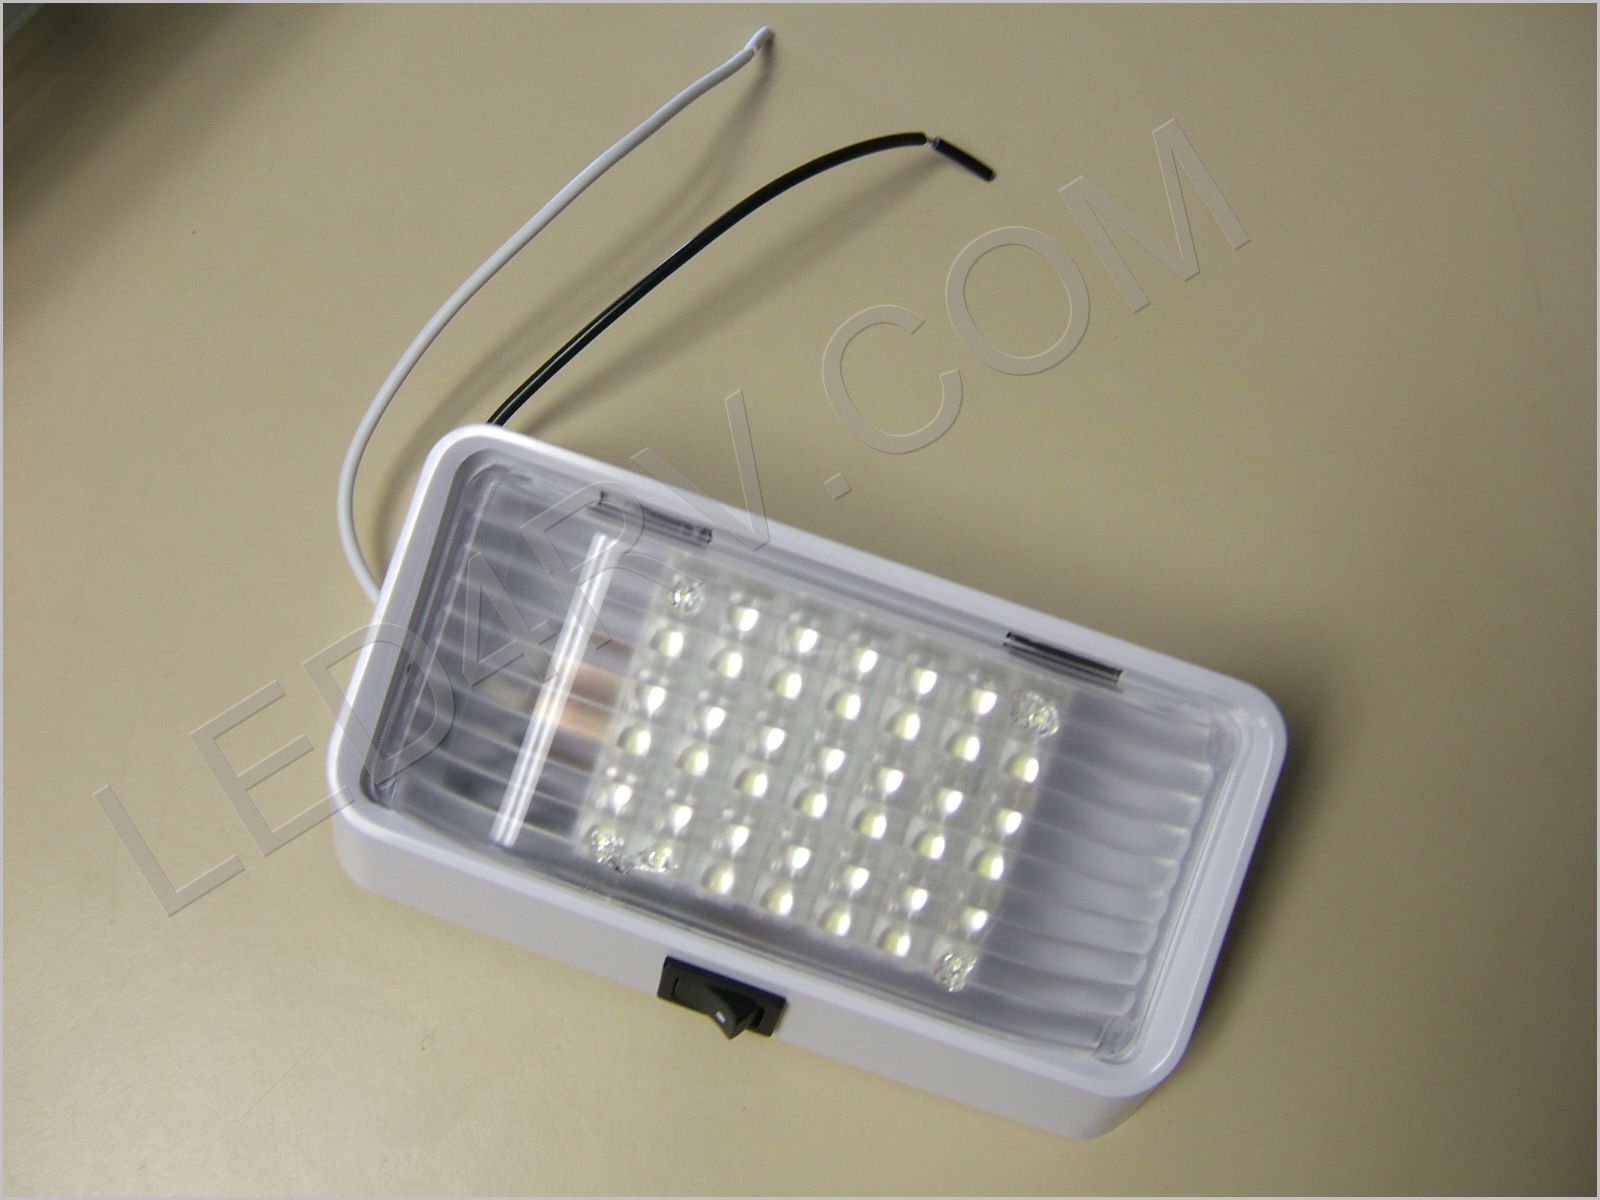 Patio LED Light 6 by 3.25 in Bright White with switch SKU256 - Click Image to Close